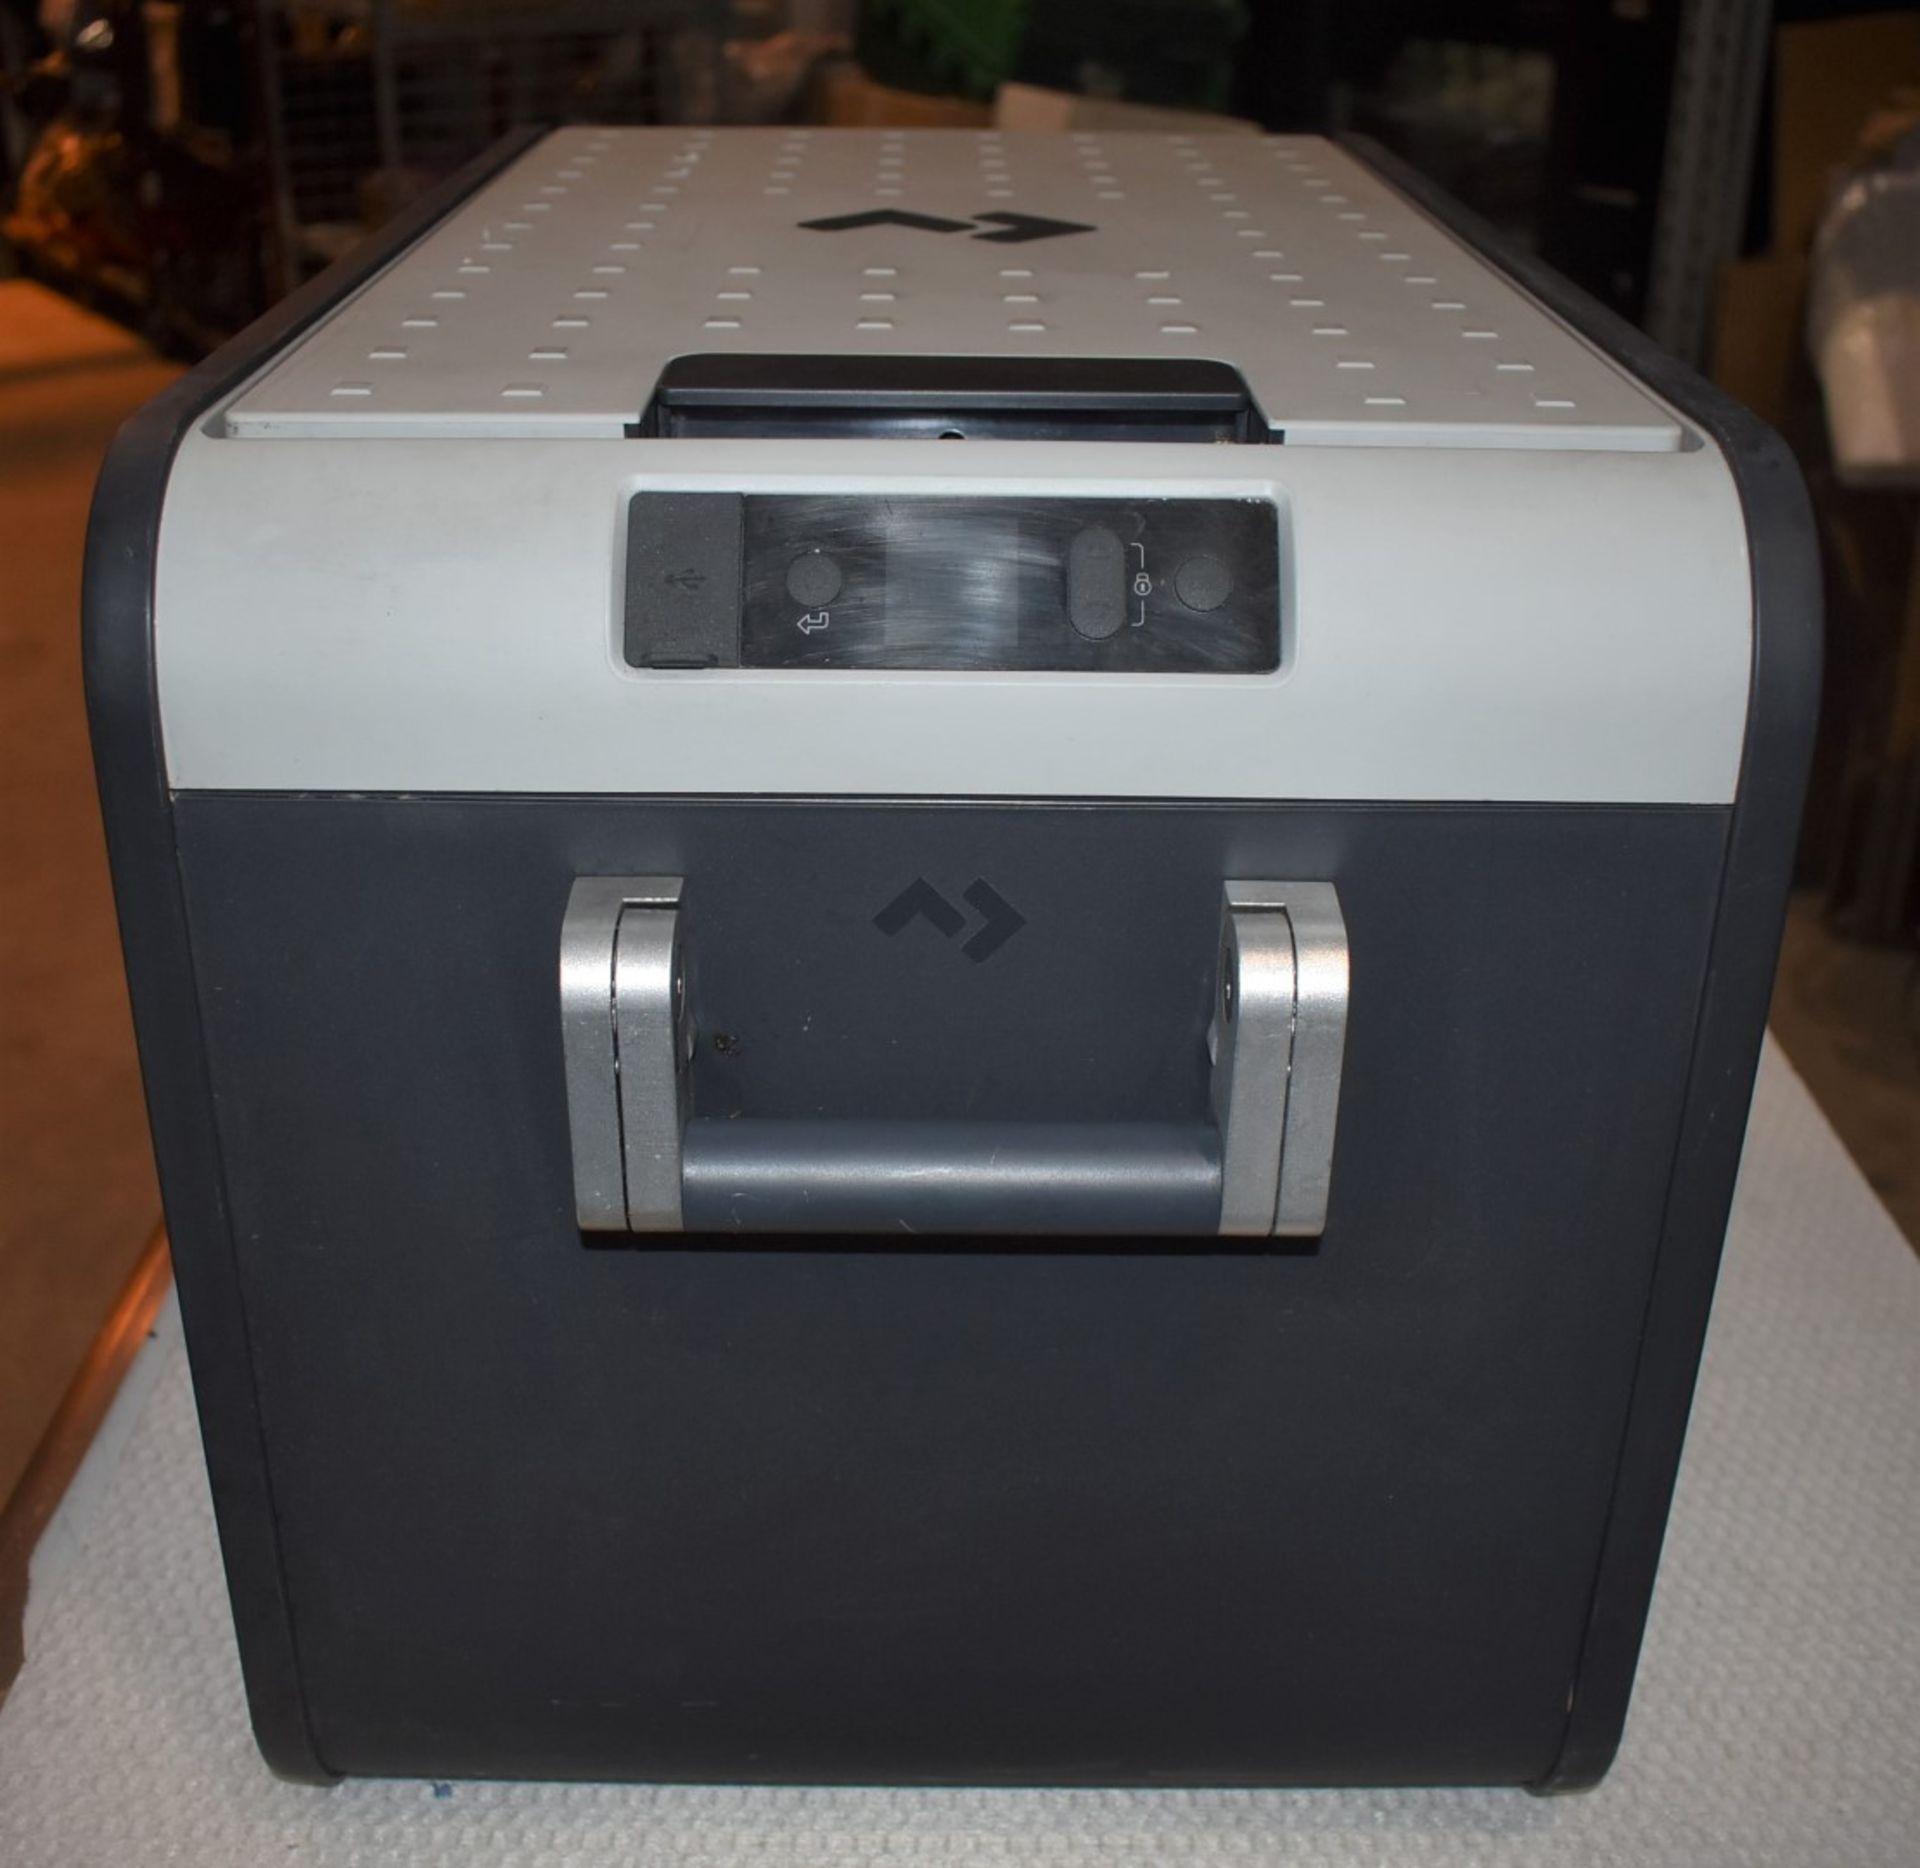 1 x Dometic CFX3 35 Portable 32l Compressor Cooler and Freezer - Perfect For Cooling The Christmas - Image 6 of 9